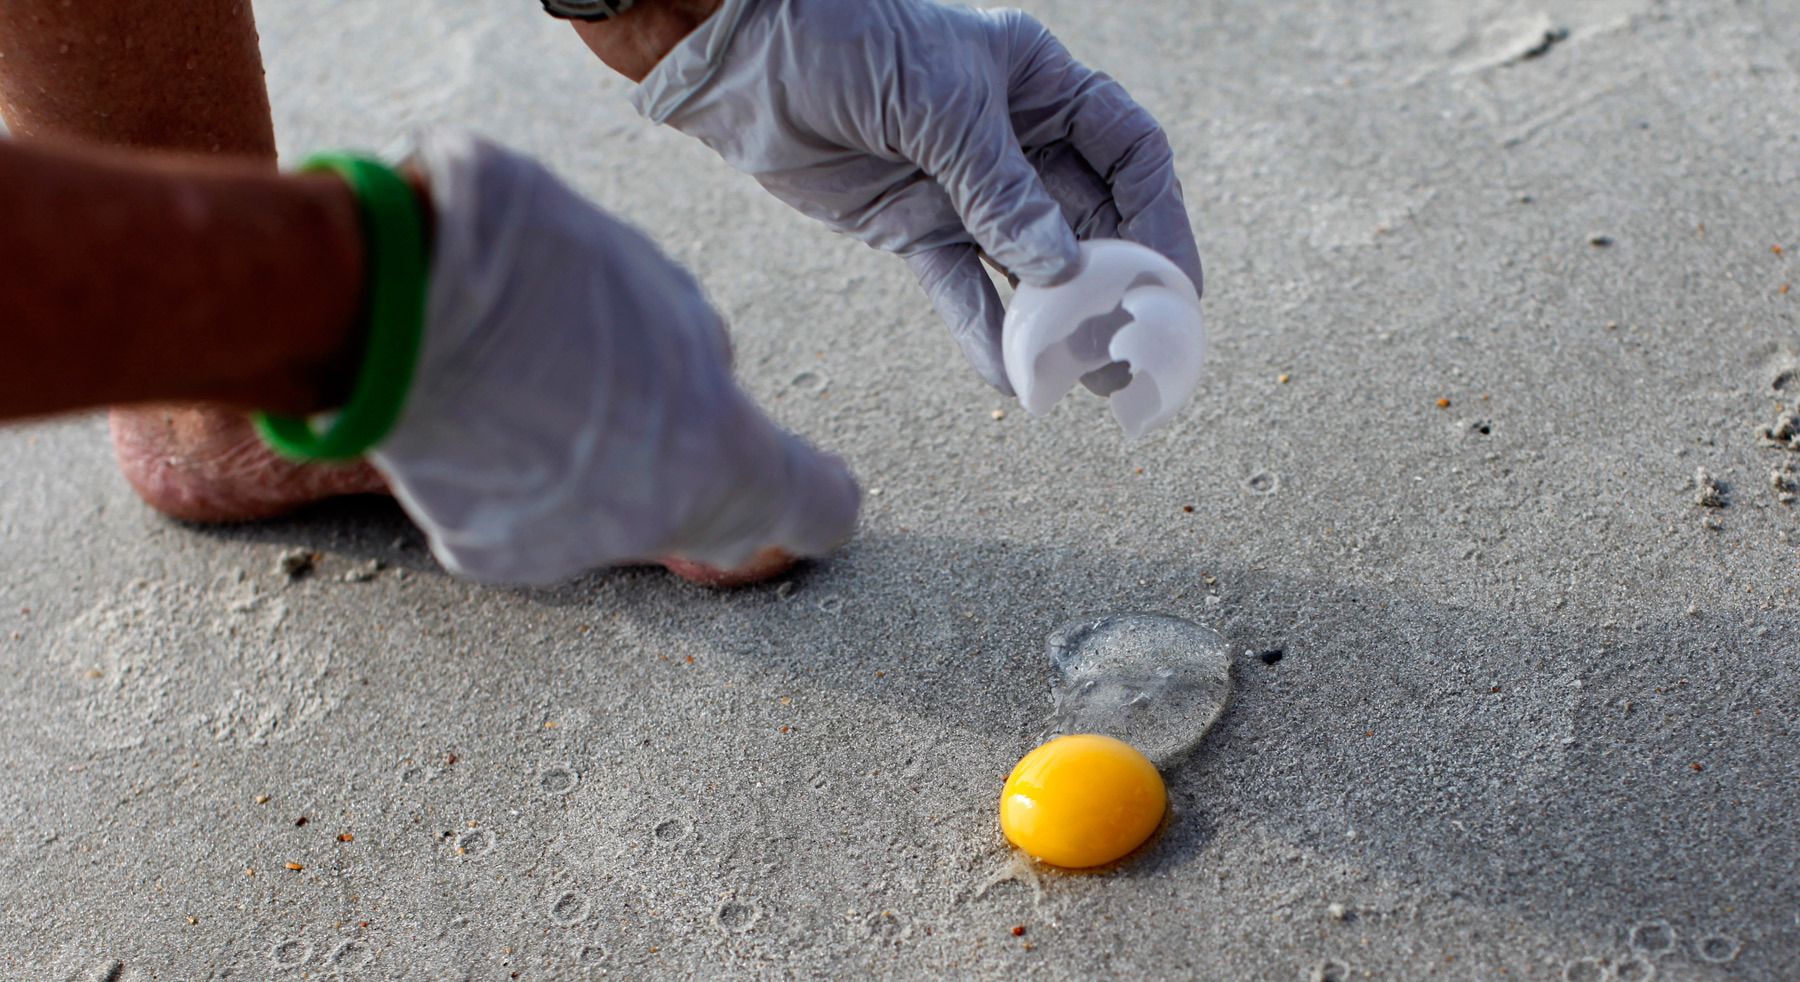 South Carolina United Turtle Enthusiasts (SCUTE) coordinator Sue Habermeier opens a Green turtle egg for a DNA sample on Garden City Beach, South Carolina August 13, 2012. During a nest relocation or inspection, one egg is sacrificed for the DNA sample located in the membrane on the inside of the shell that scientists use to track the female turtles.REUTERS/Randall Hill